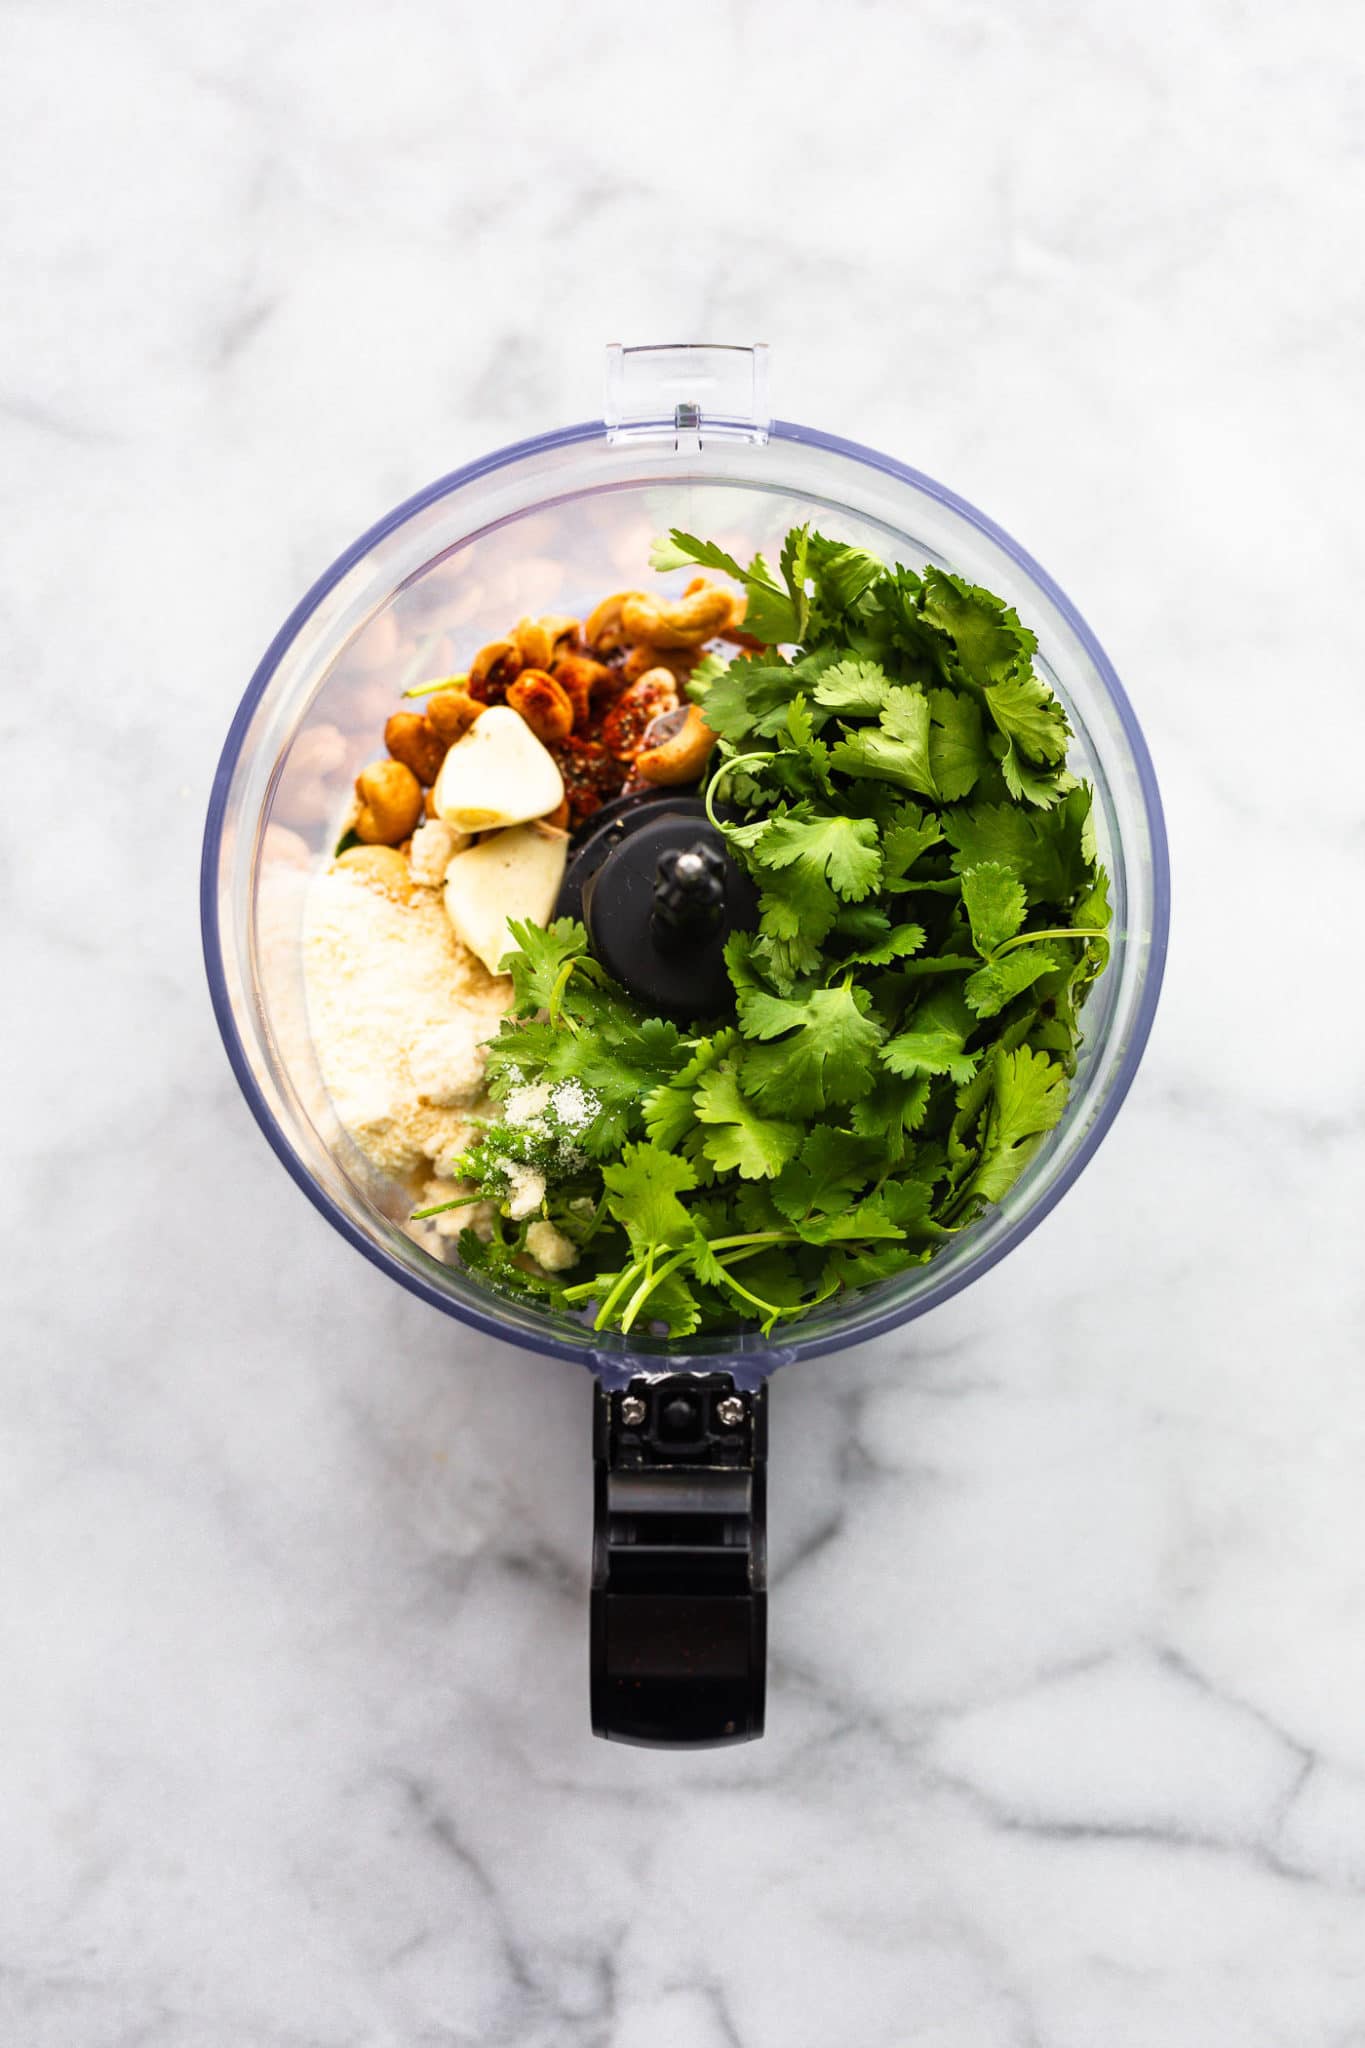 an overhead image of a food processor filled with unblended ingredients for cilantro pesto including cilantro, raw cashews, garlic cloves, and grated Parmesan